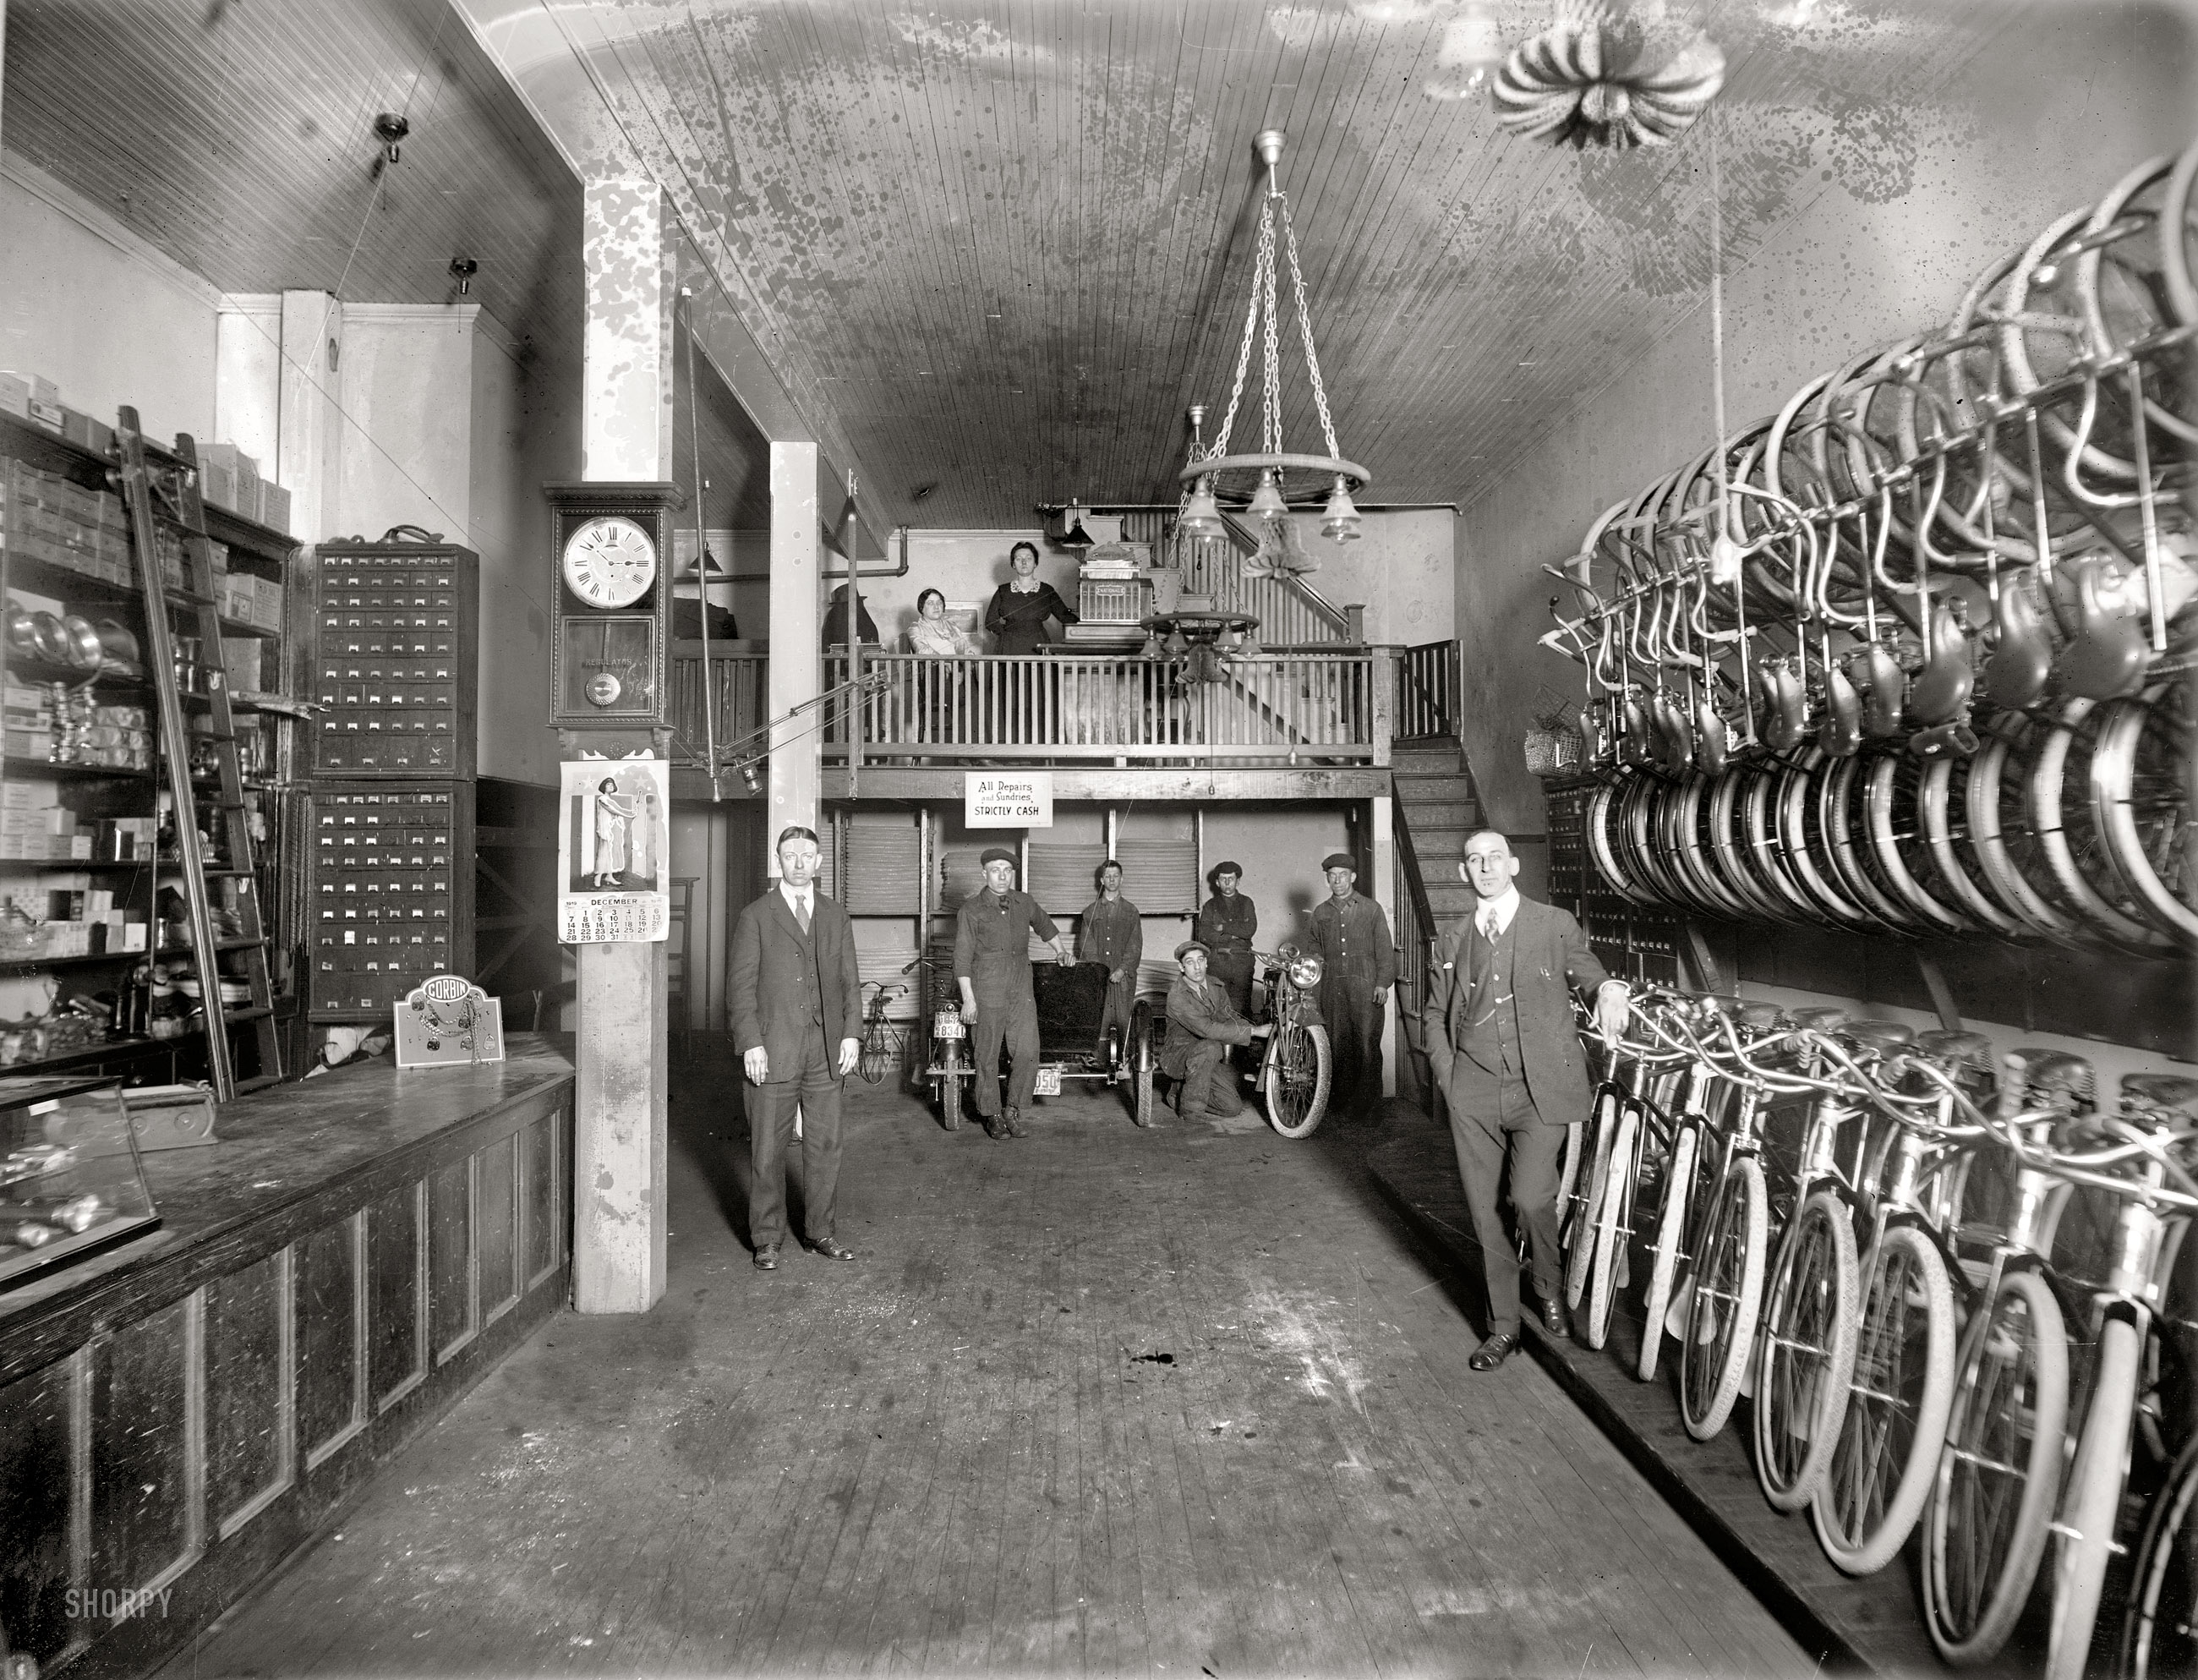 December 1919. Washington, D.C. "Haverford Cycle, interior, 10th Street N.W. Agents for Smith Motor Wheel." National Photo glass negative. View full size.